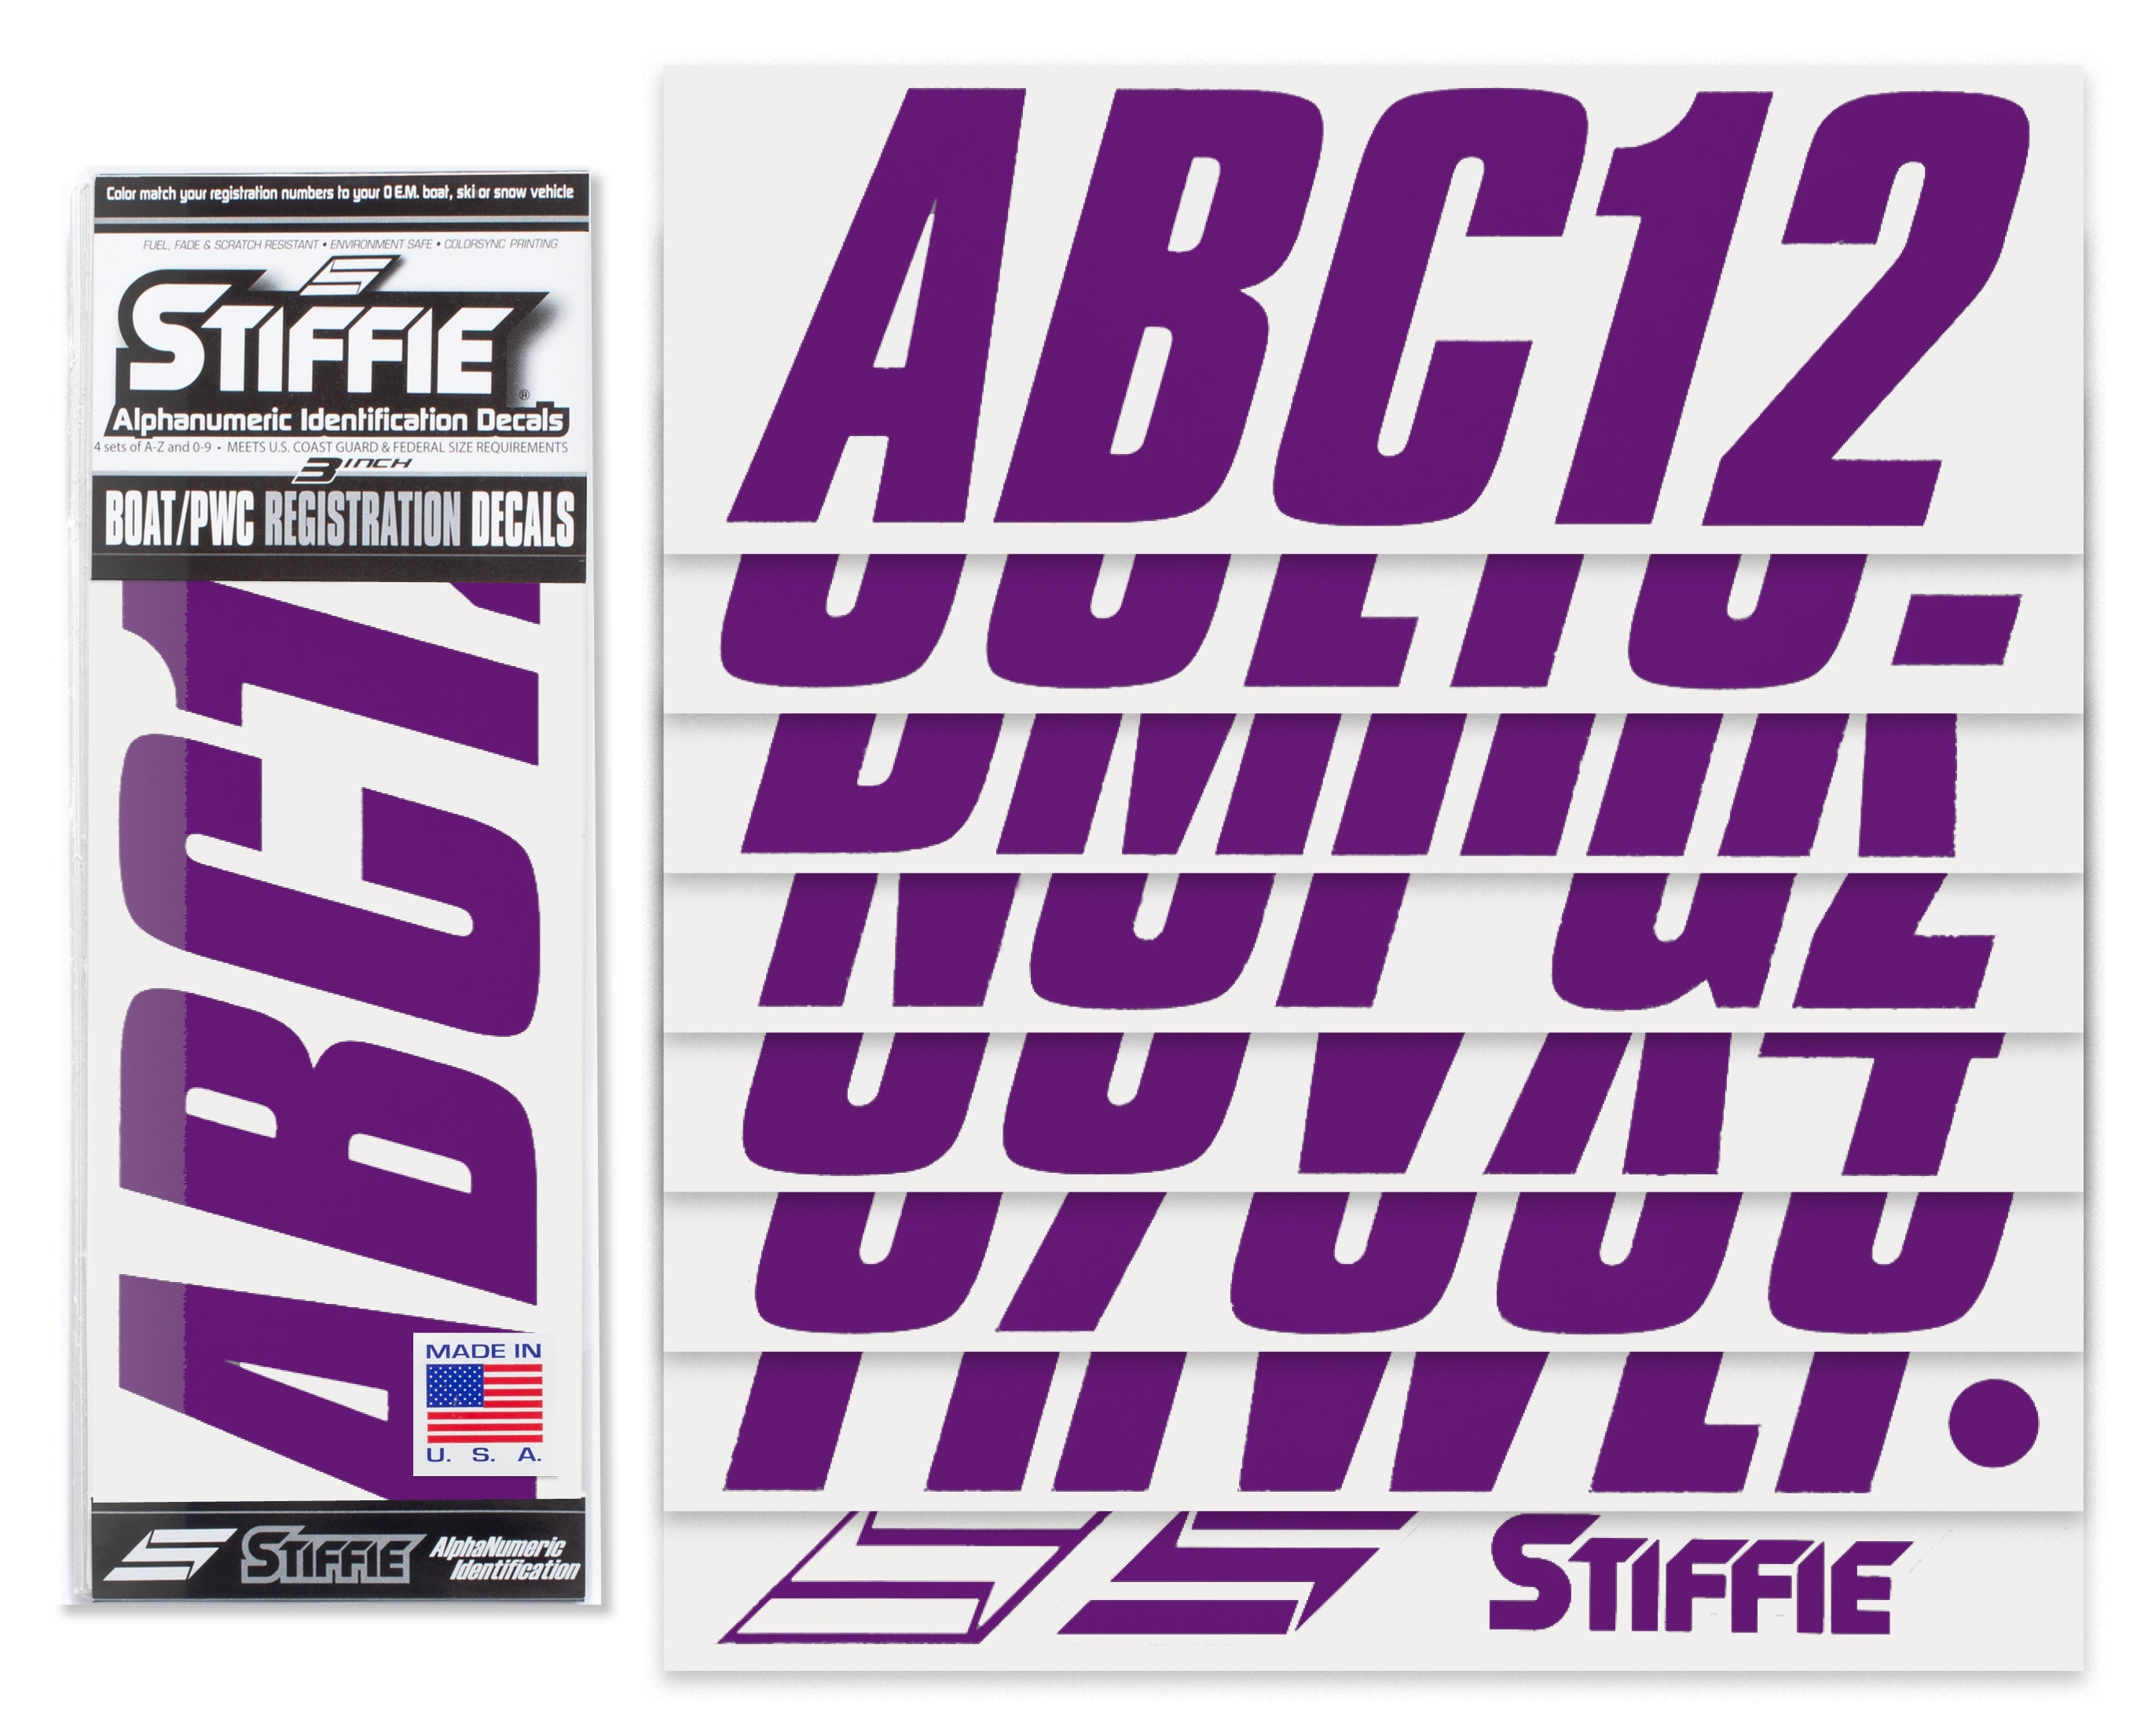 STIFFIE Shift Purple 3" ID Kit Alpha-Numeric Registration Identification Numbers Stickers Decals for Boats & Personal Watercraft